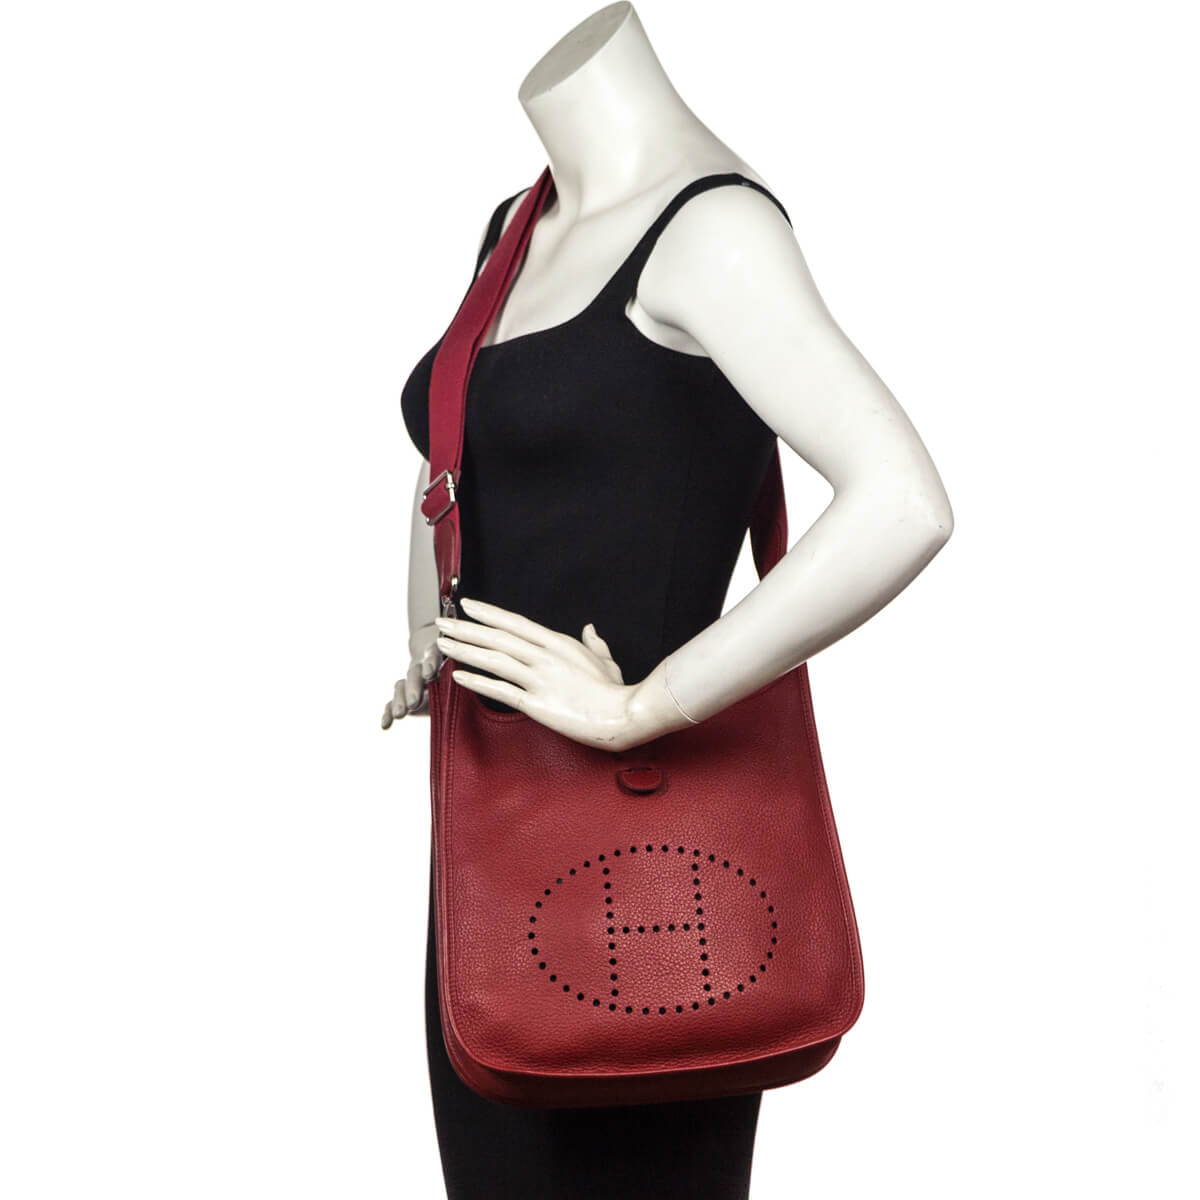 Hermes Rouge Hermes Clemence Evelyne III PM - Love that Bag etc - Preowned Authentic Designer Handbags & Preloved Fashions